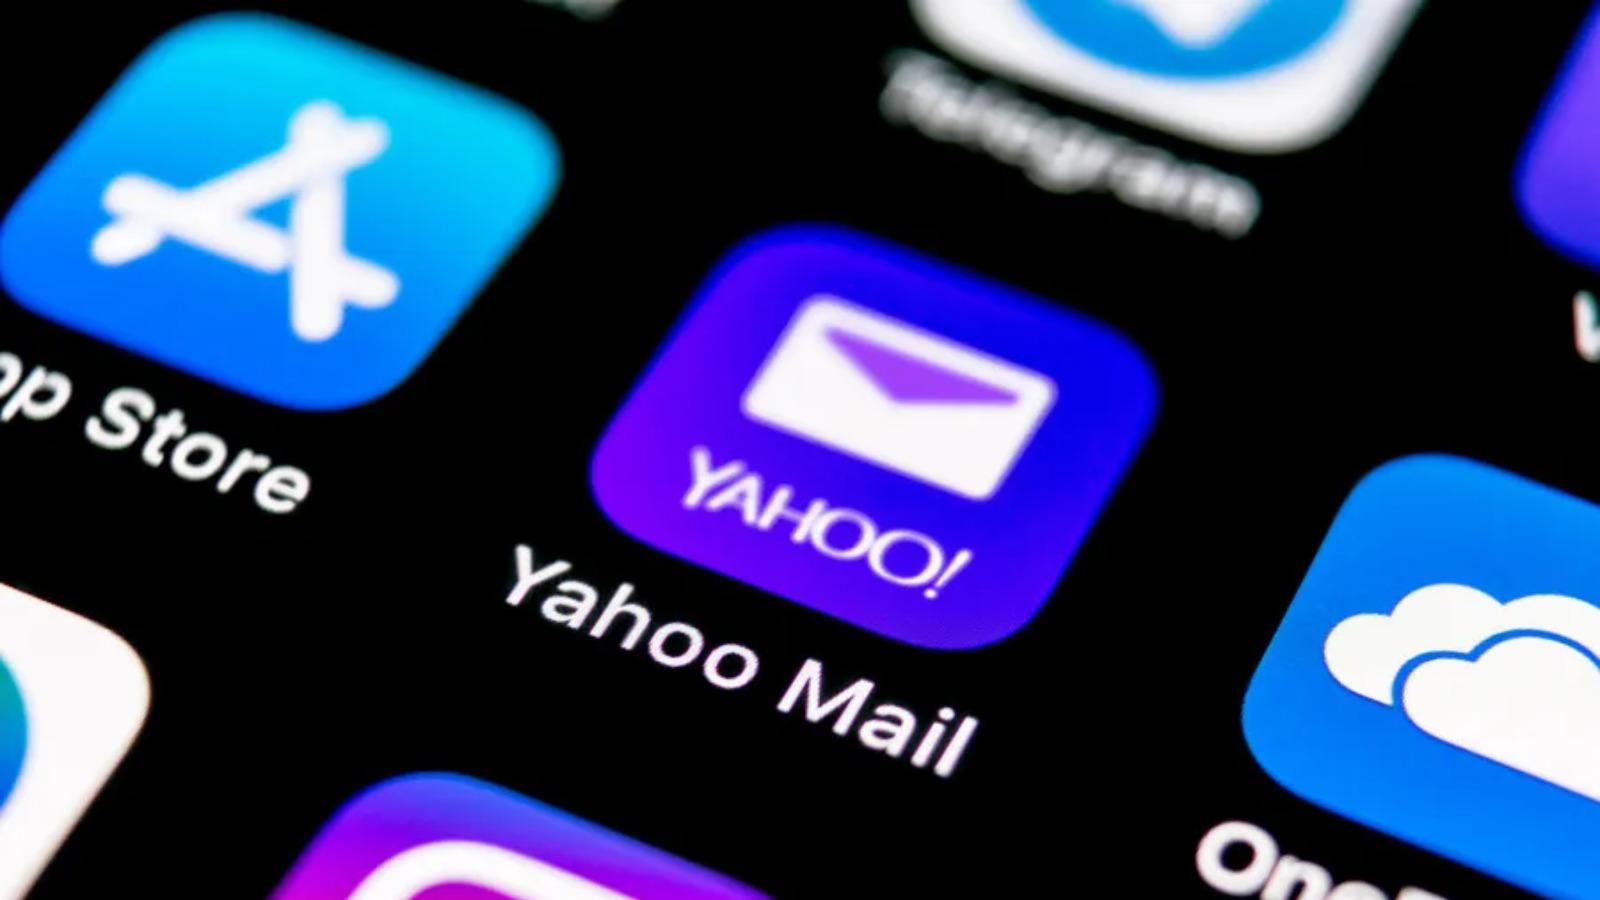 yahoo-mail-is-making-it-easier-for-online-shoppers-to-find-deals